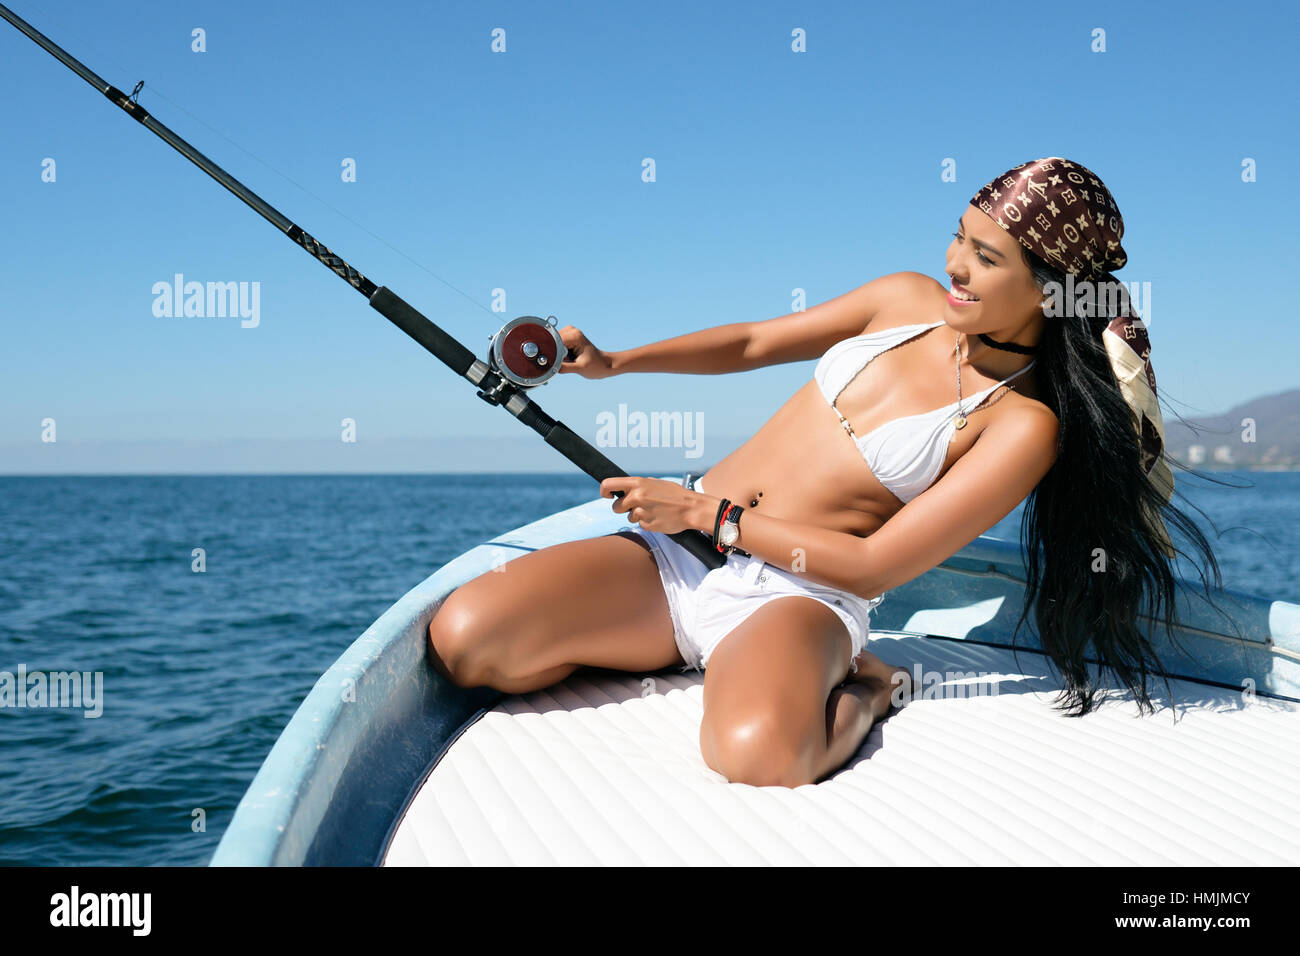 Attractive young hispanic woman leaning back while trying to reel in her catch at fishing off a boat. She looks happy and excited. Stock Photo